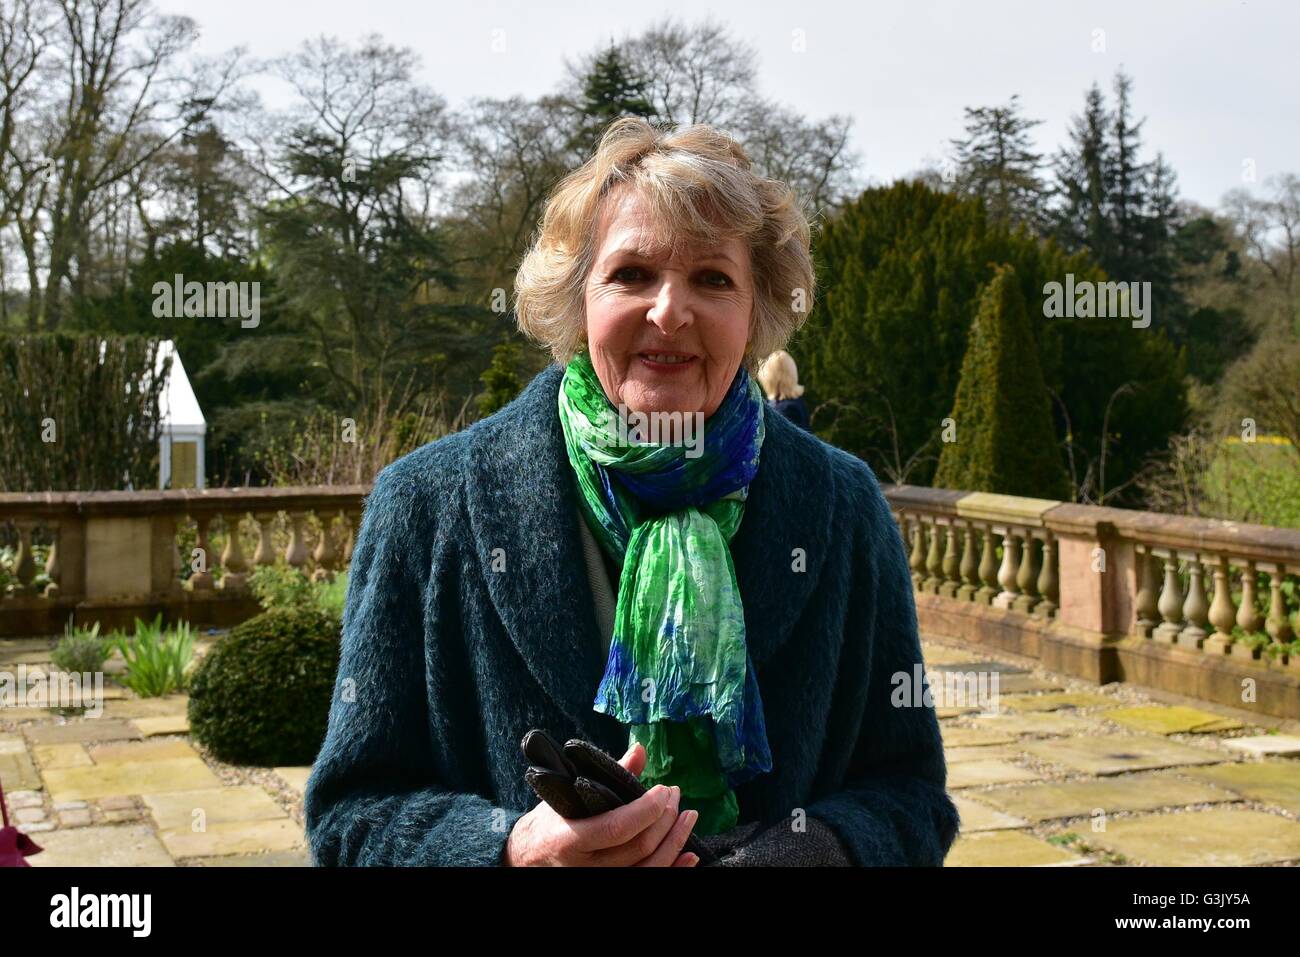 Hillsborough, United Kingdom. 21st Apr, 2016. Actress Penelope Keith in Attendance during a 21 Gun Salute took place in the Grounds of Queen Elizabeths Northern Ireland Residence, Hillsborough Castle to mark Her Majesty's 90th Birthday © Mark Winter/Pacific Press/Alamy Live News Stock Photo